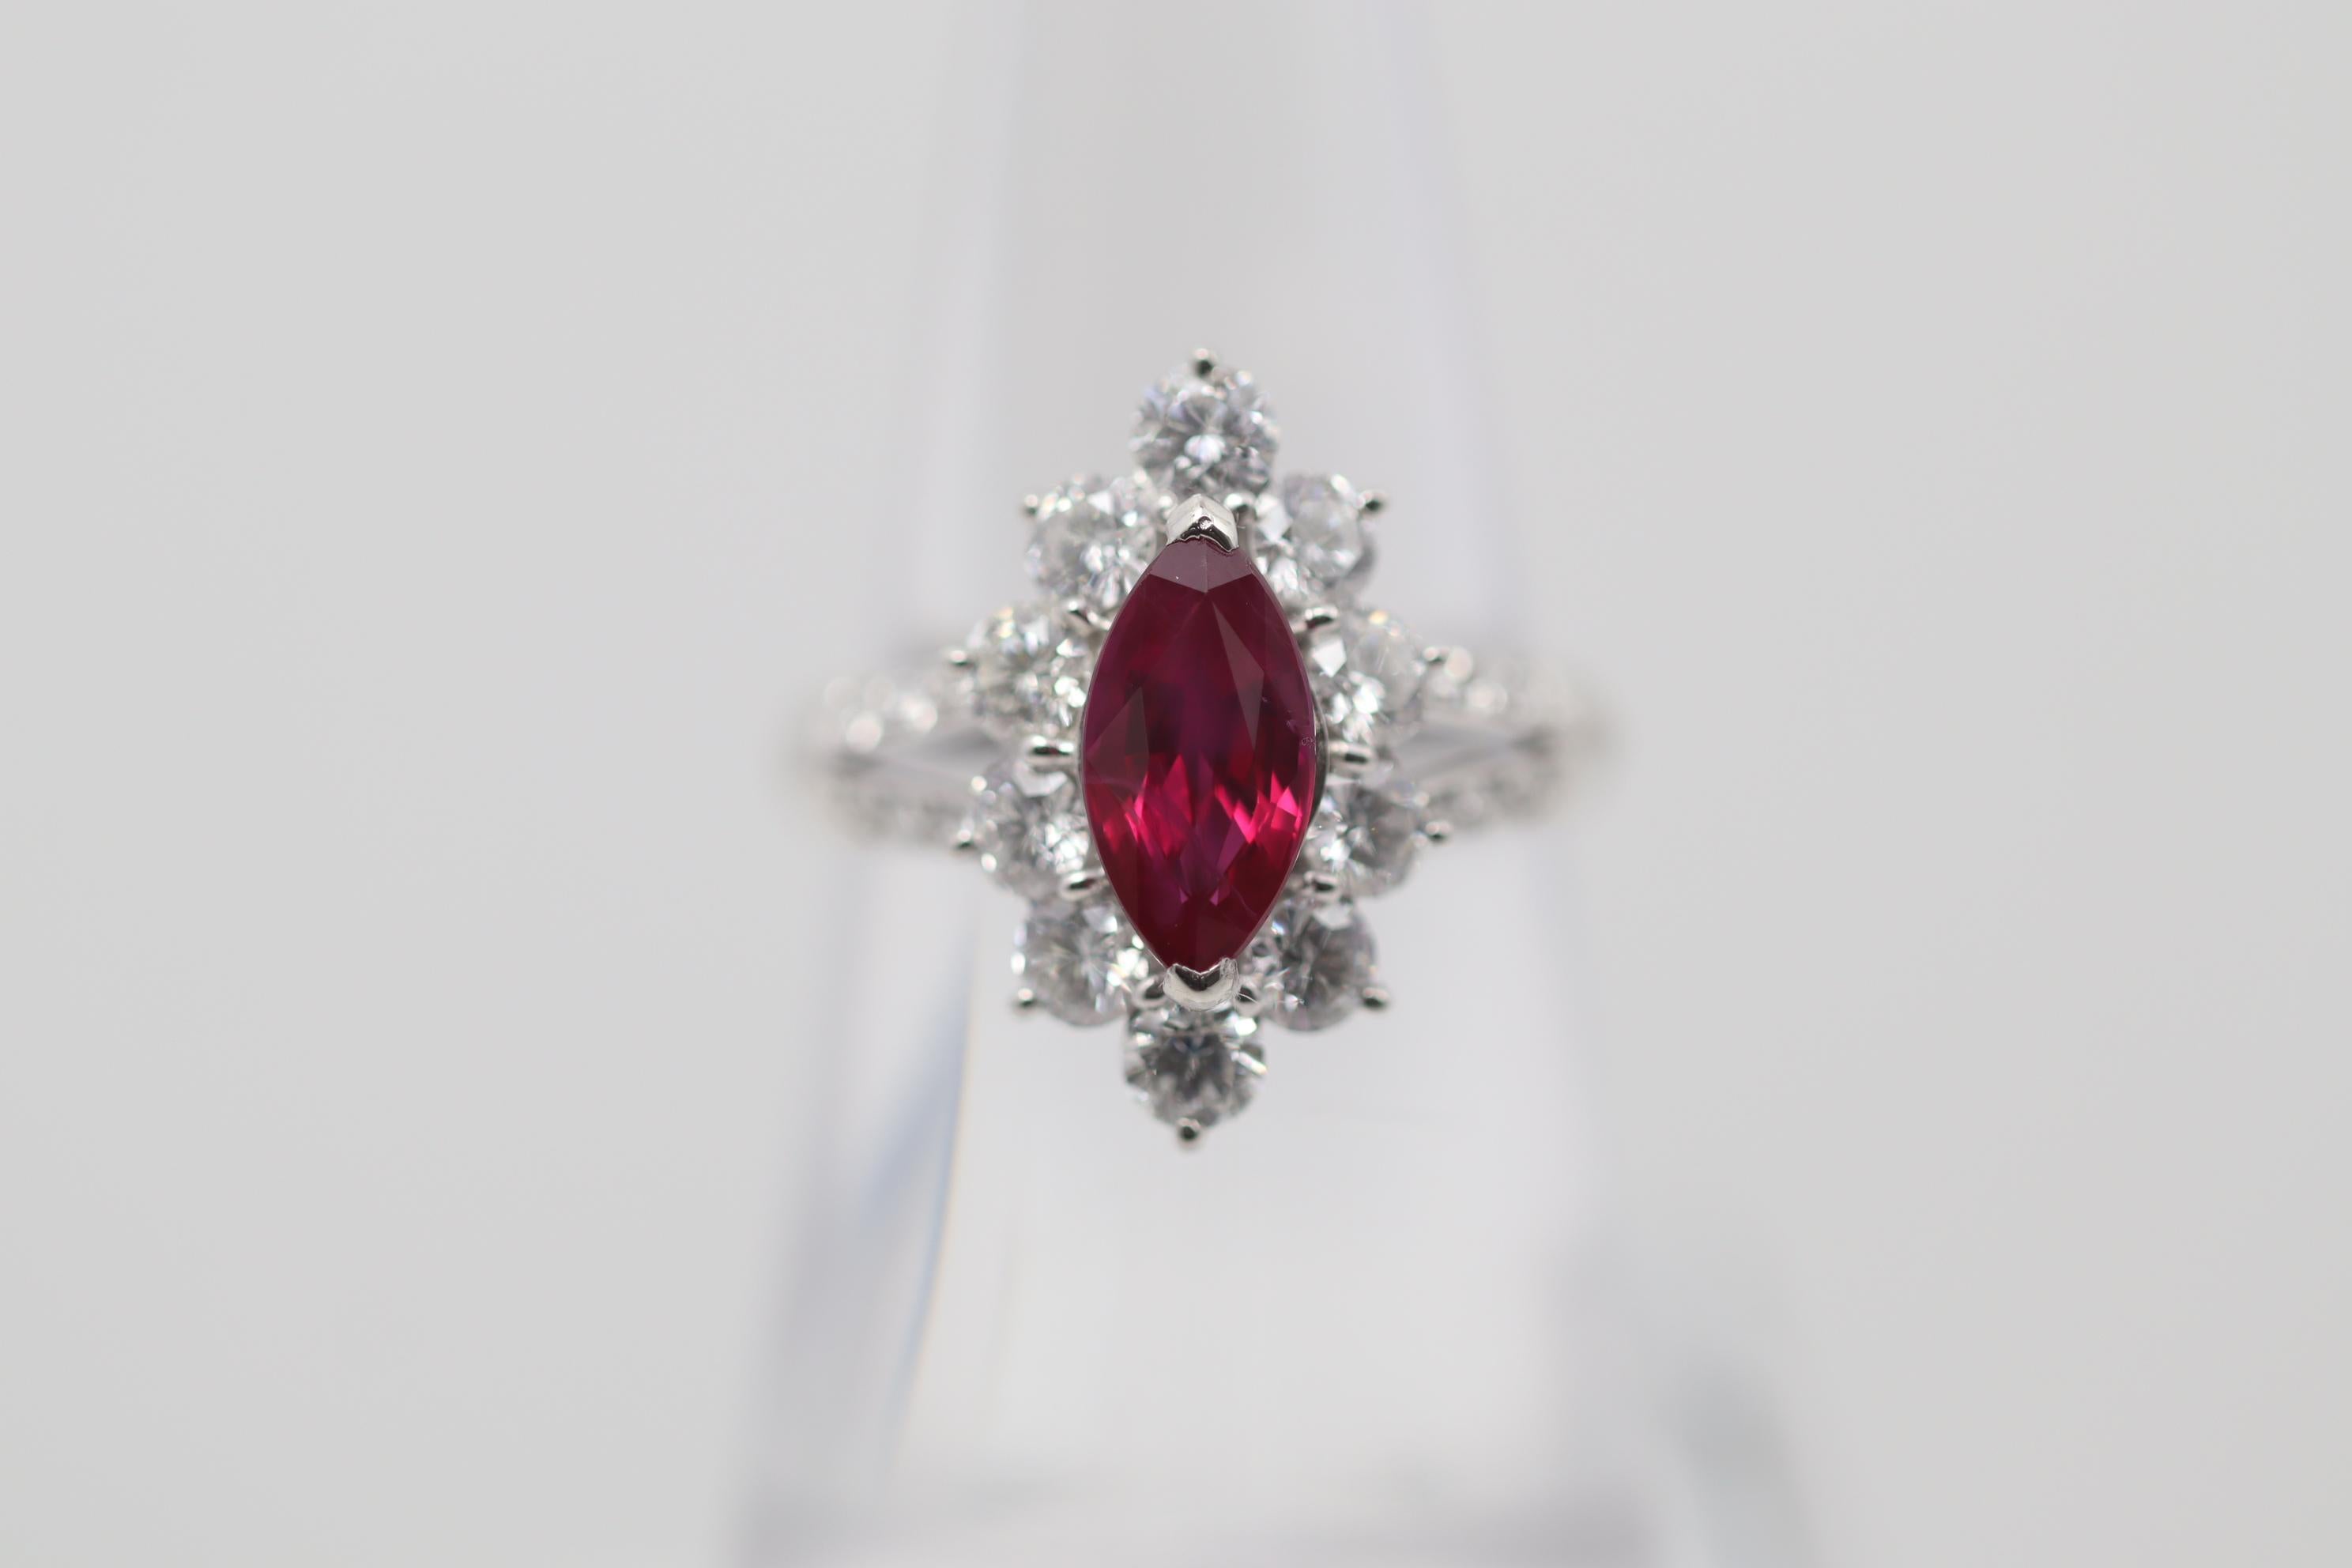 An elegant and chic ring featuring a 1.57 carat Burmese ruby which has been GIA certified. It has a lovely marquise-shape and a rich red color typical of Burmese stones. It is complemented by 1.31 carats of diamonds, larger diamonds surrounding the